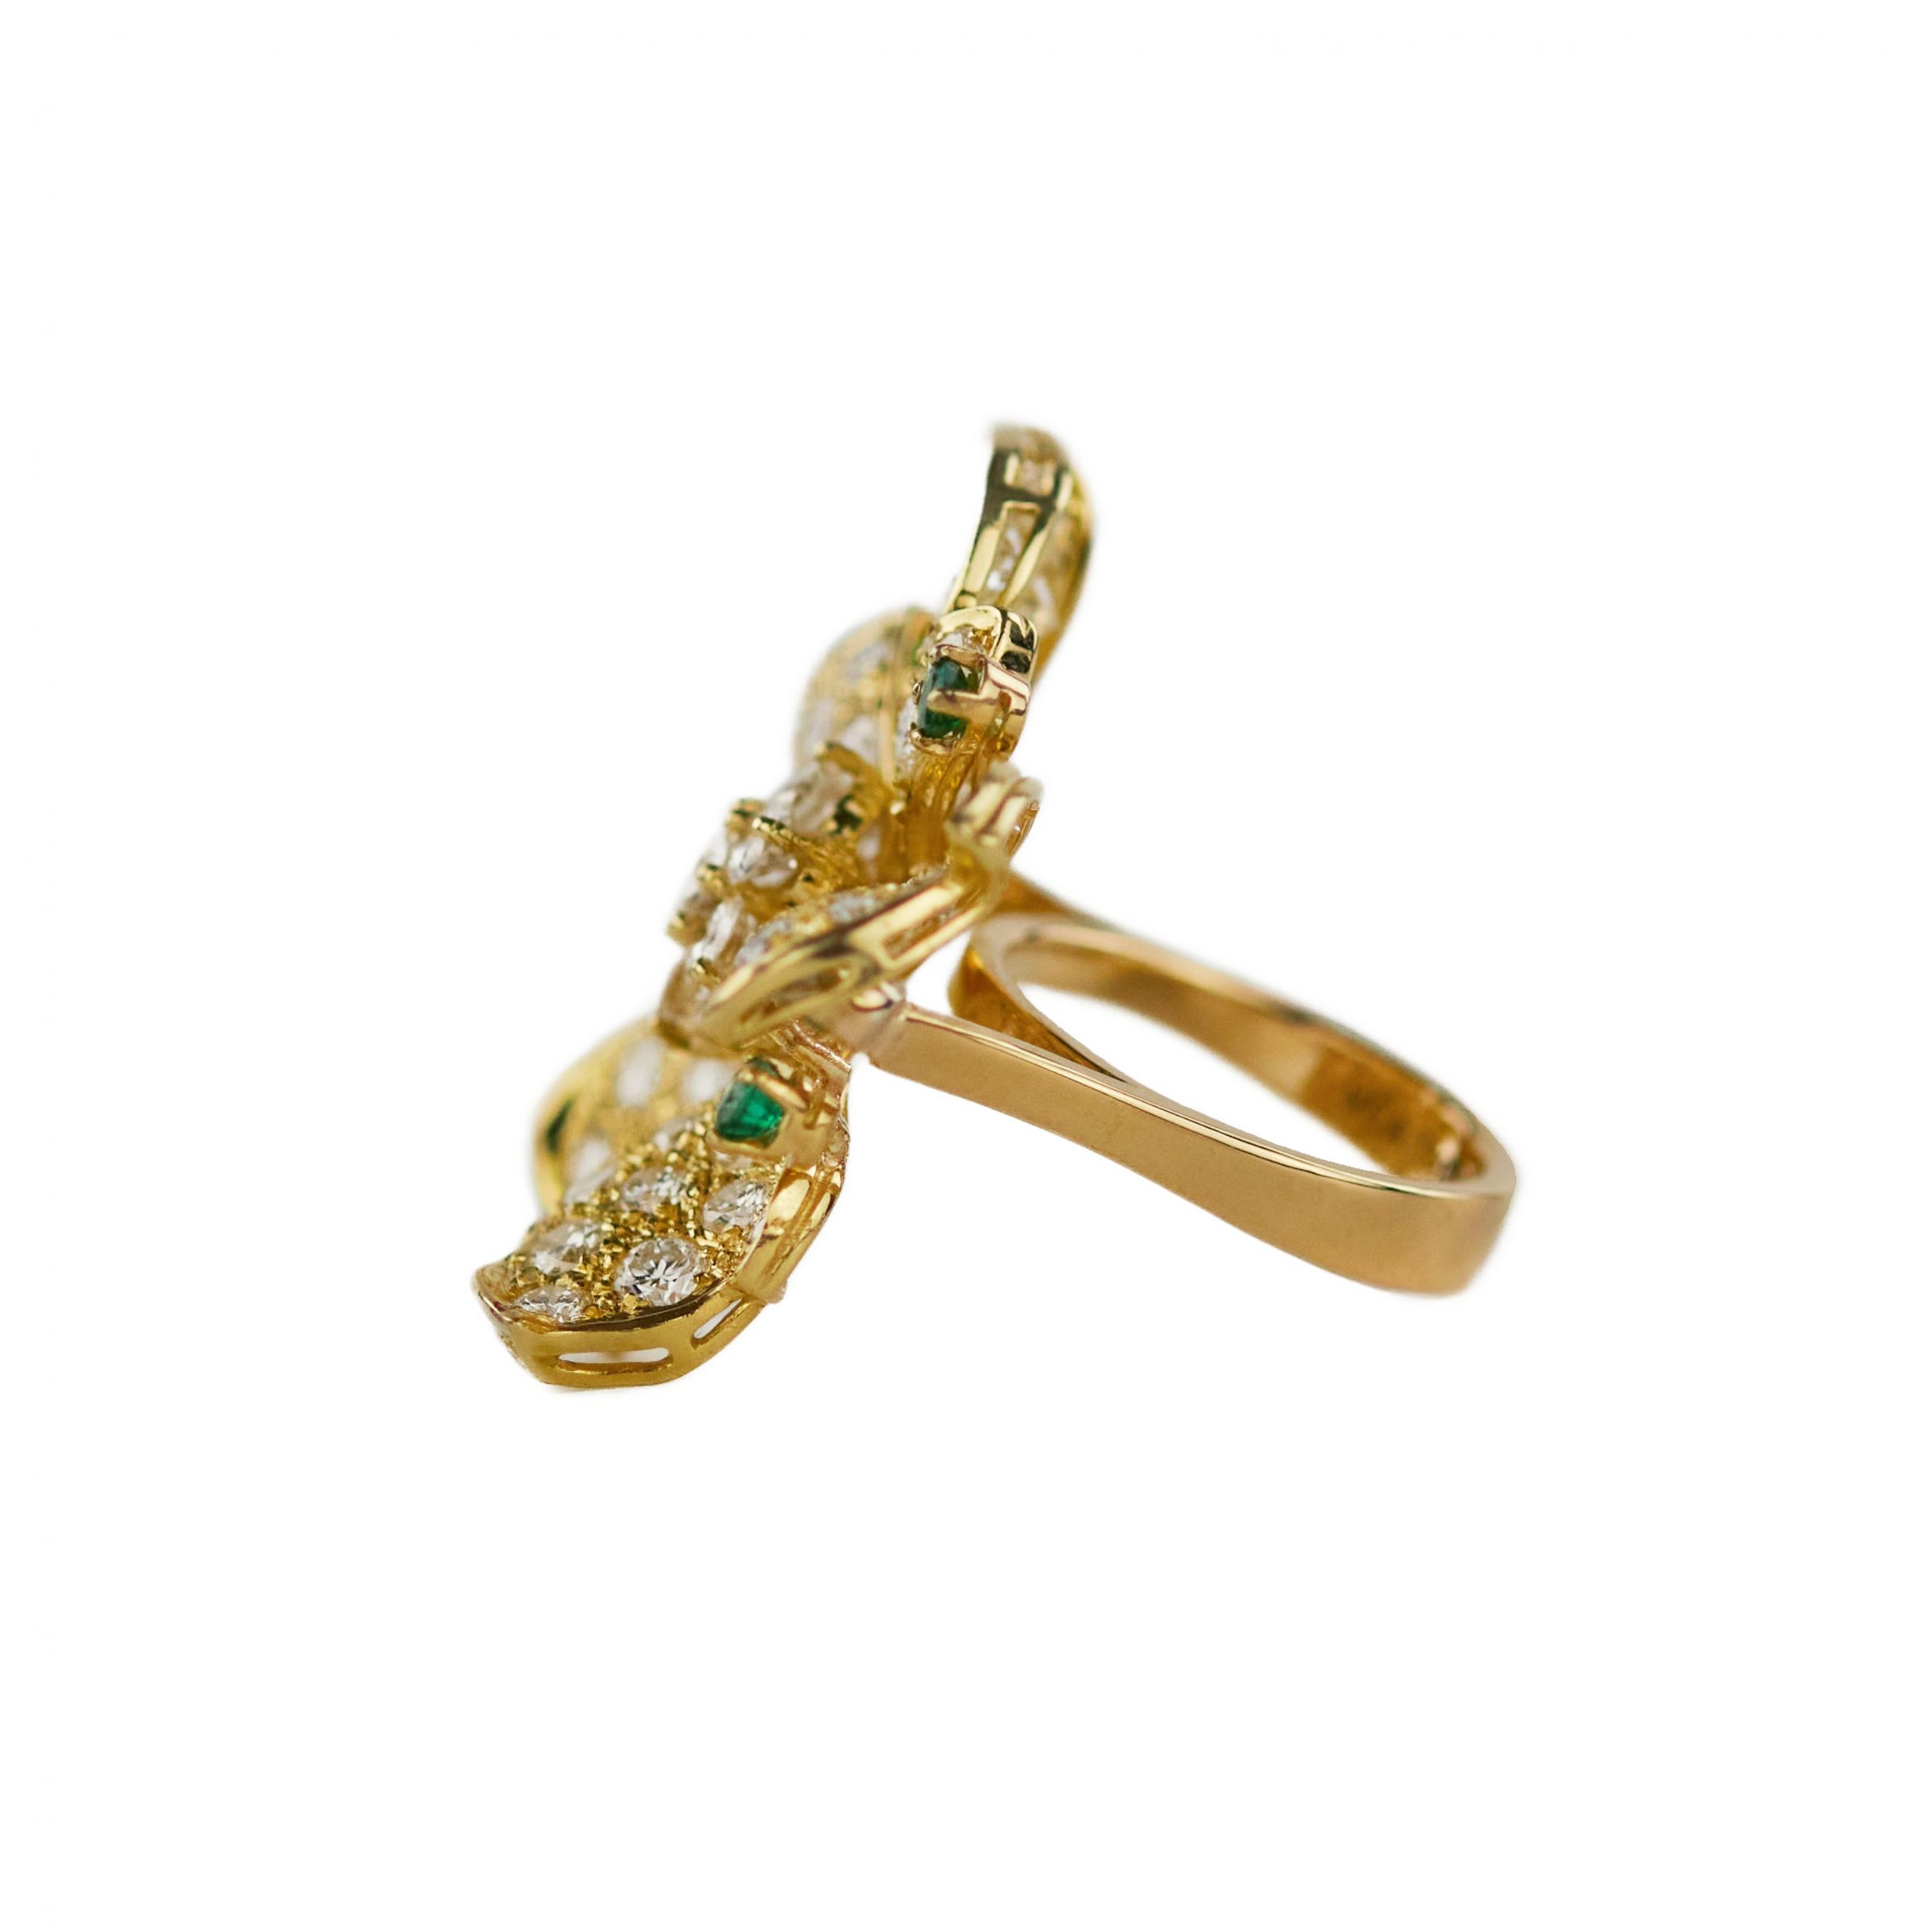 Gold 18K ring with seventy-seven diamonds and five emeralds. - Image 4 of 8